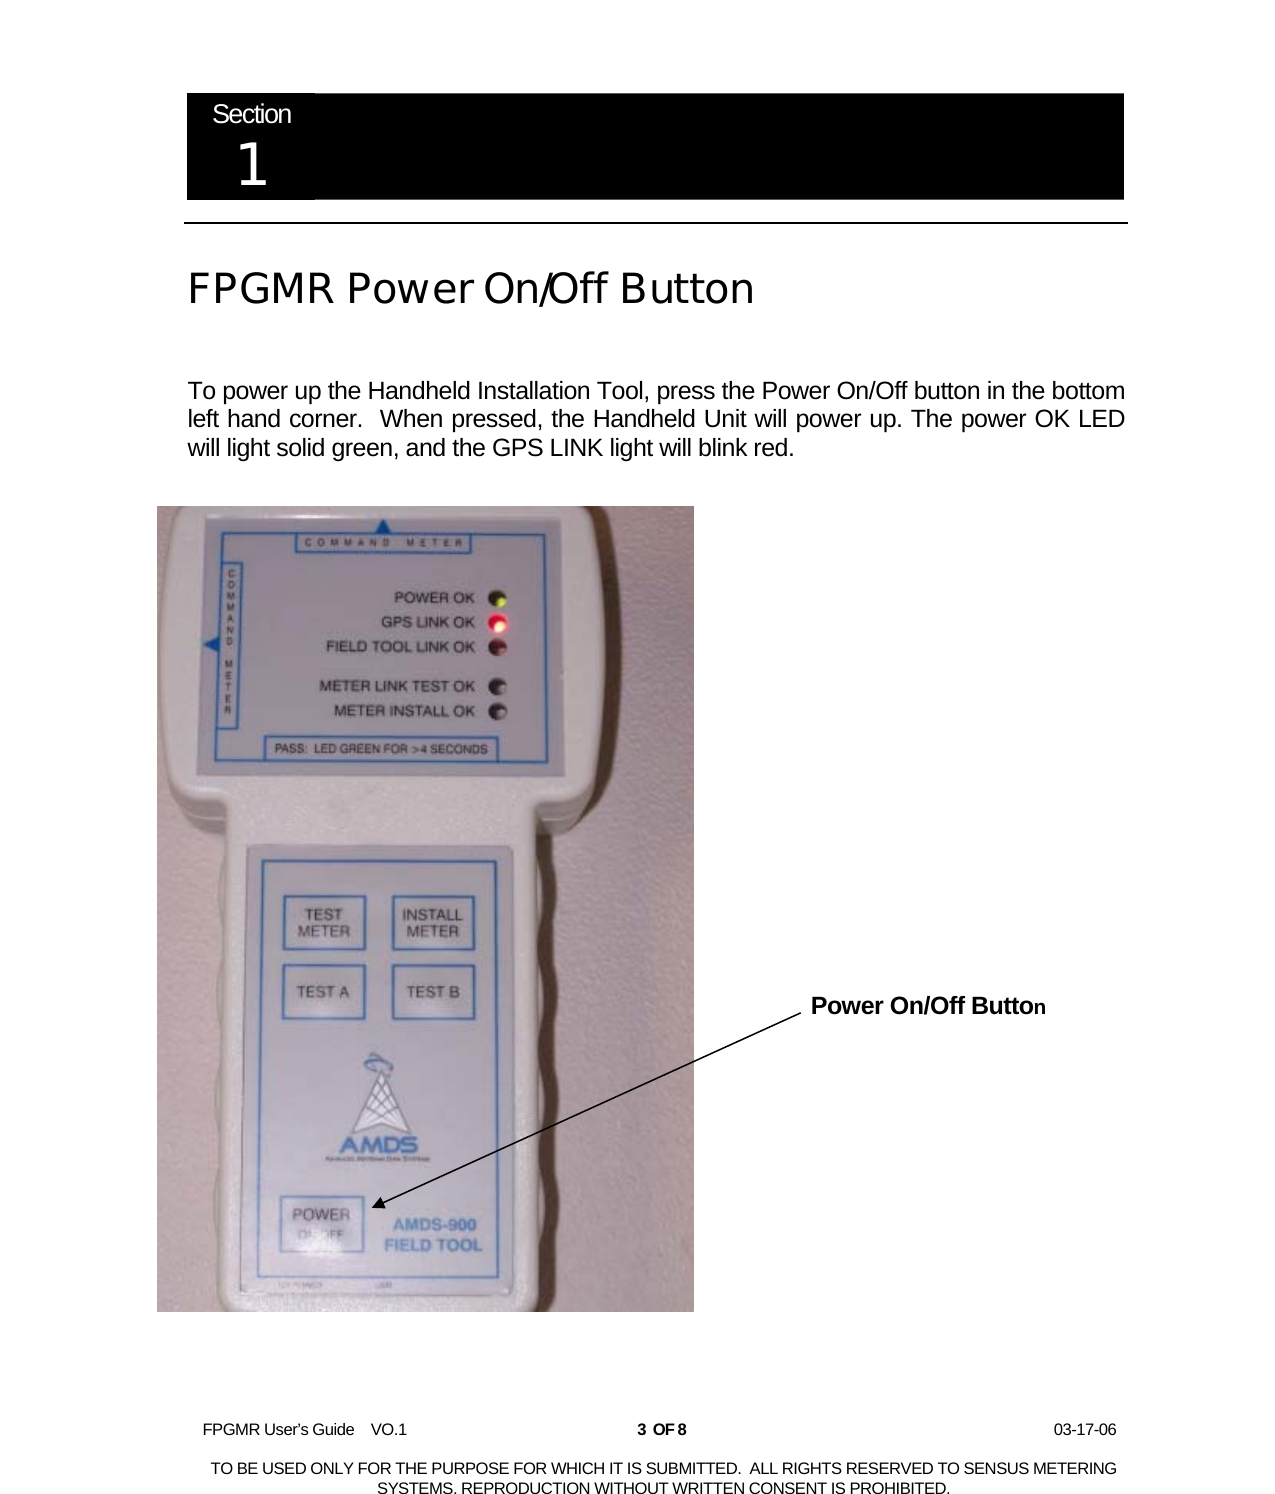  FPGMR User’s Guide    VO.1       3  OF 8                    03-17-06  TO BE USED ONLY FOR THE PURPOSE FOR WHICH IT IS SUBMITTED.  ALL RIGHTS RESERVED TO SENSUS METERING SYSTEMS. REPRODUCTION WITHOUT WRITTEN CONSENT IS PROHIBITED.  Section 1   FPGMR Power On/Off Button  To power up the Handheld Installation Tool, press the Power On/Off button in the bottom left hand corner.  When pressed, the Handheld Unit will power up. The power OK LED will light solid green, and the GPS LINK light will blink red.   Power On/Off Button 